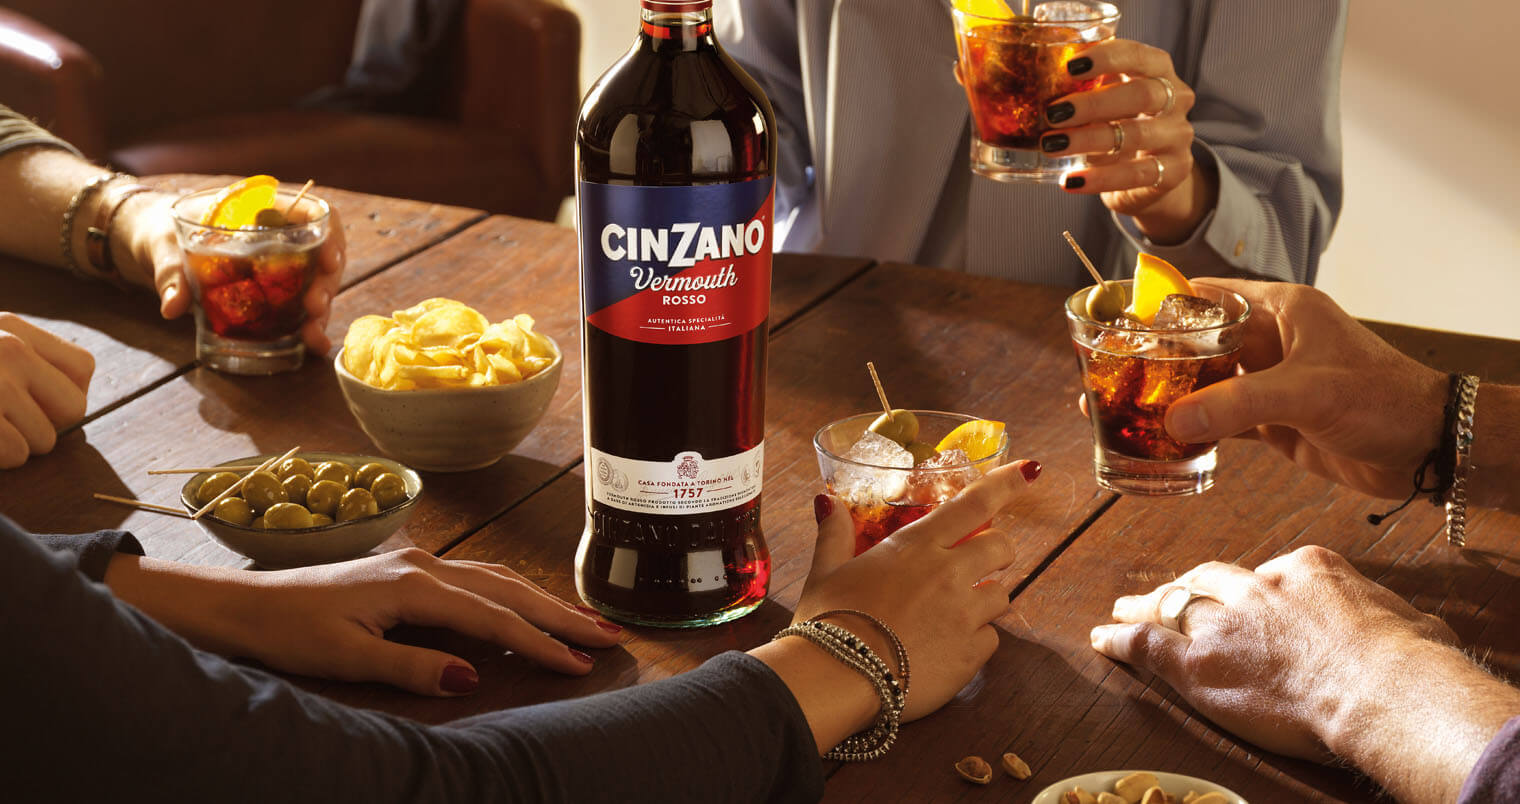 Cinzano Vermouth Rosso, featured image